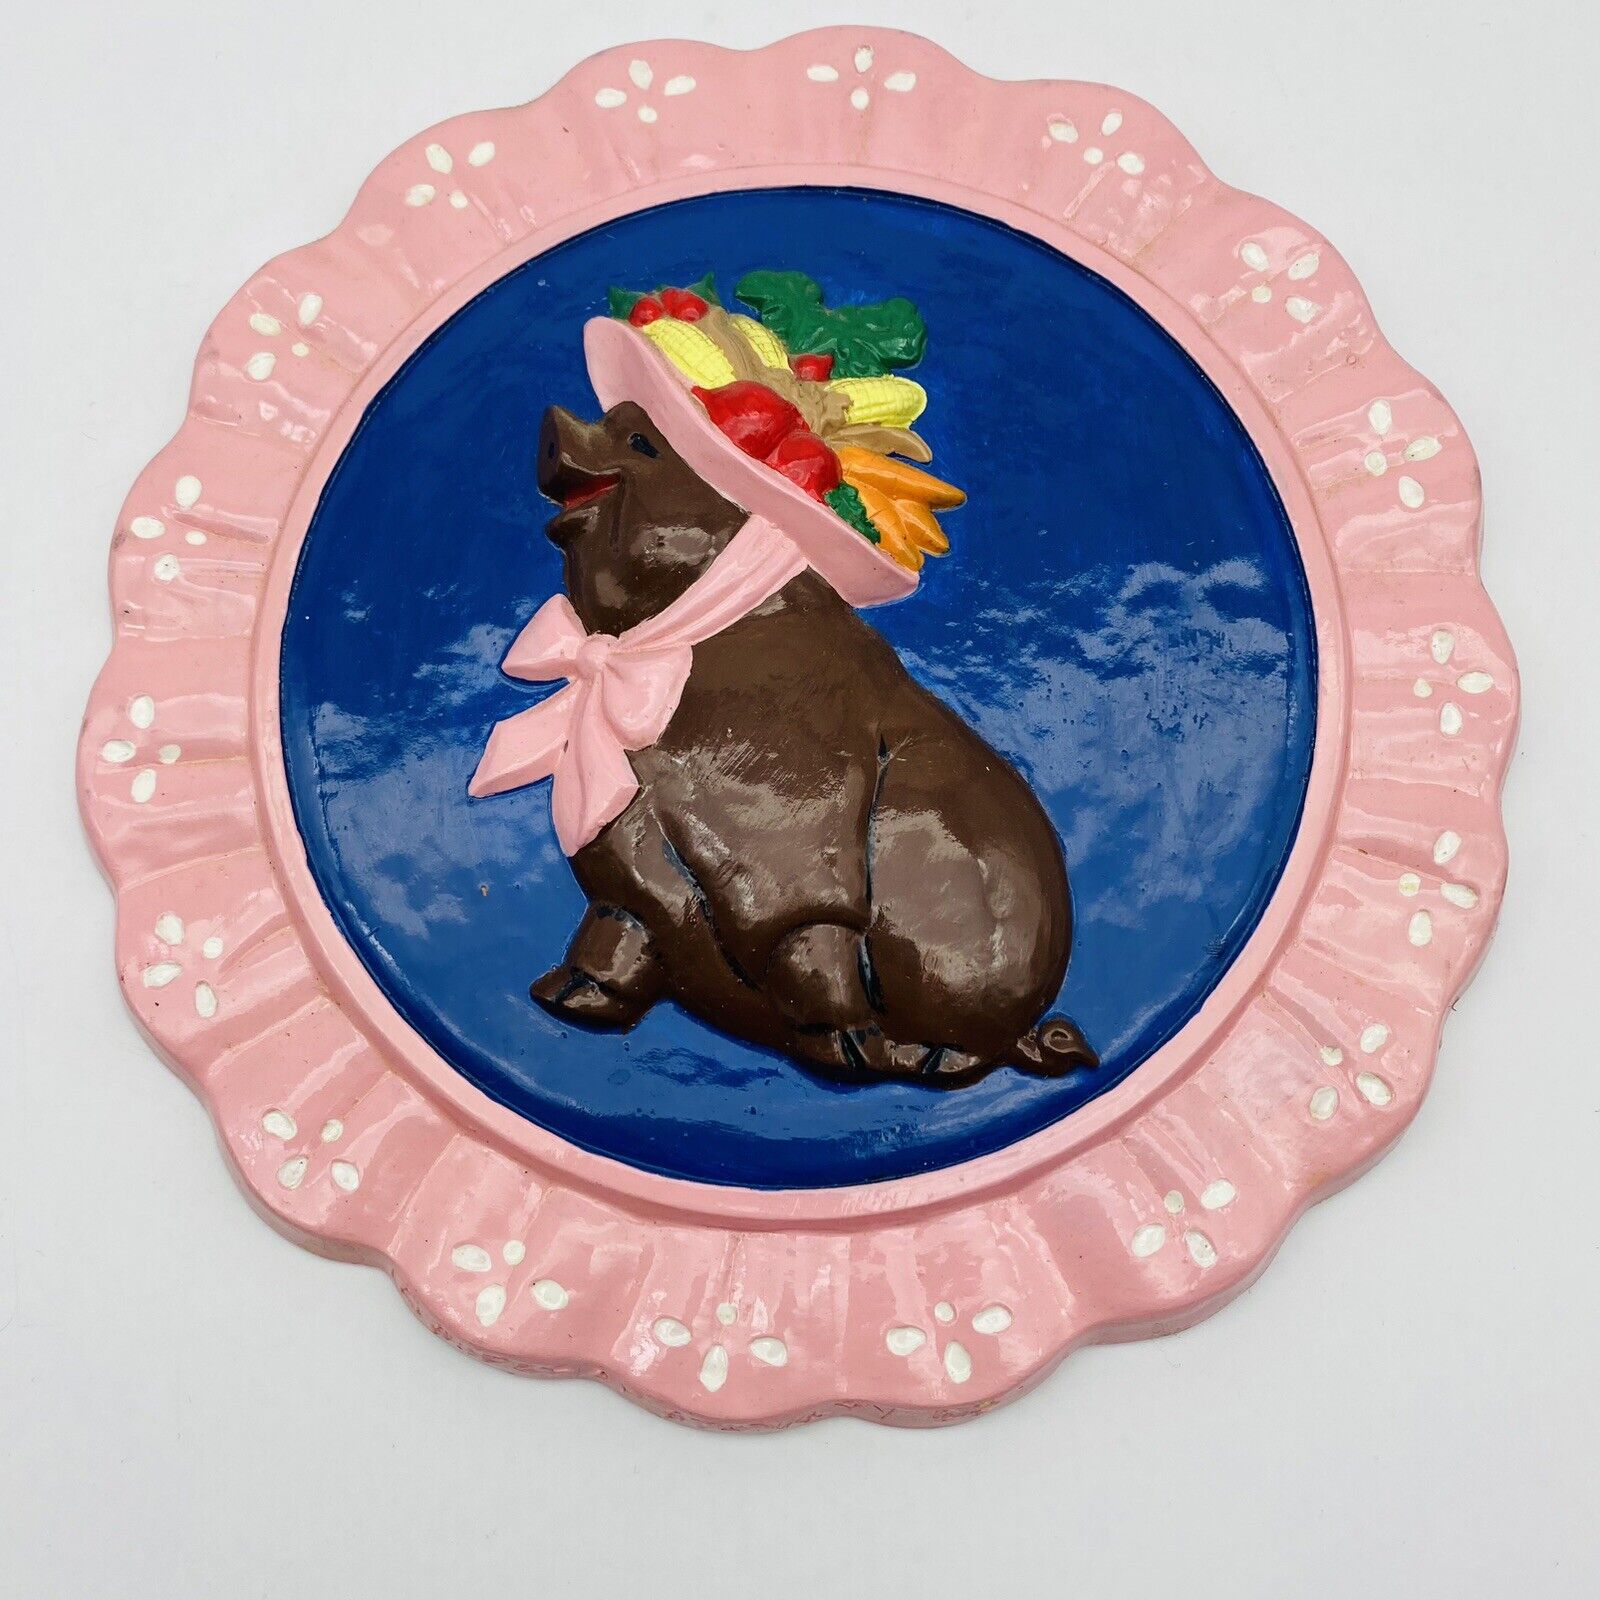 SUPERIOR STATURAY 3D PIG WEARING VEGETABLE HAT CERAMIC WALL KITCHEN PLAQUE RARE